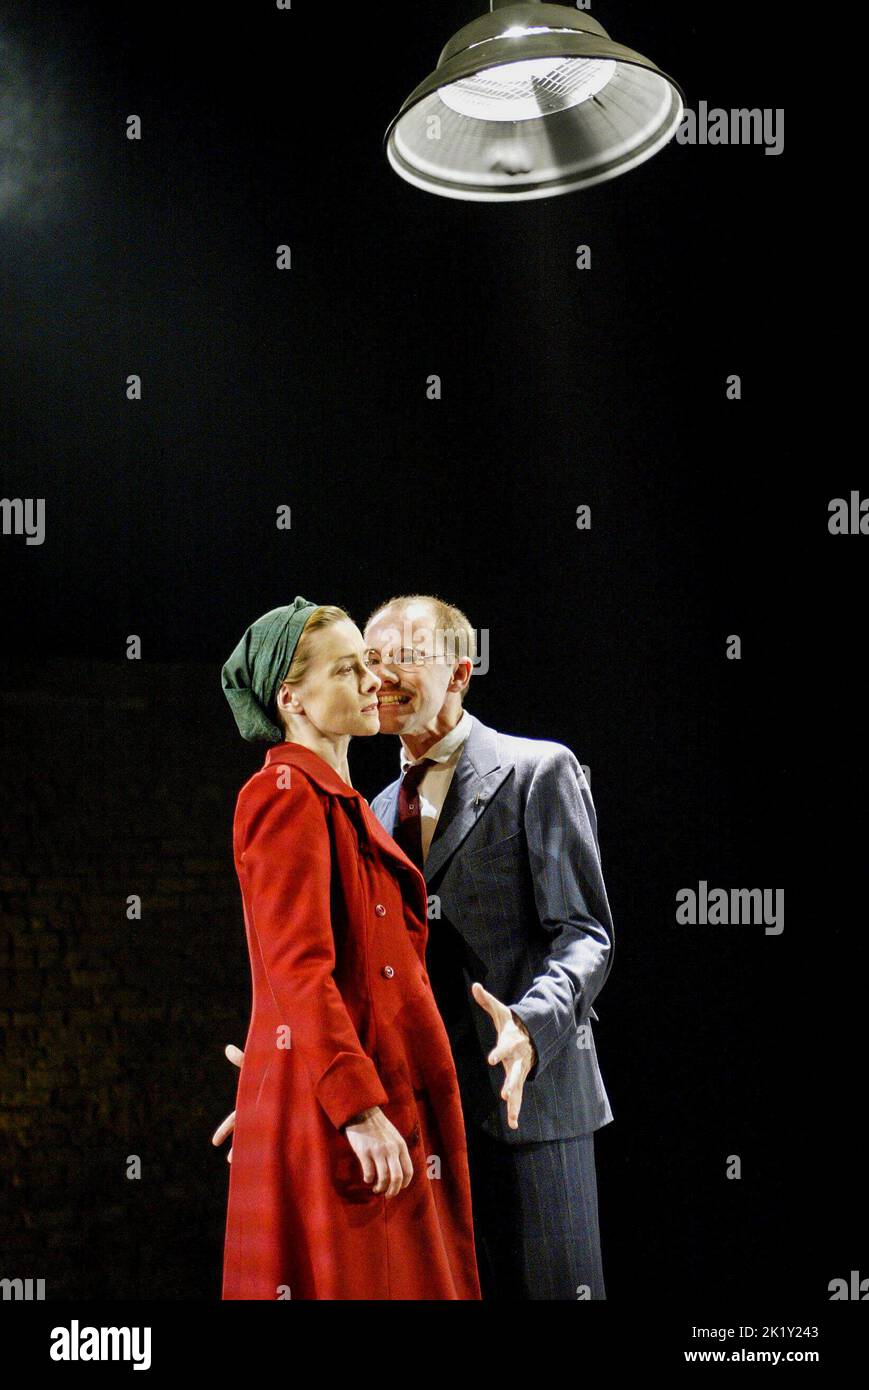 Emma Fielding (Isabella), Daniel Evans (Angelo) in MEASURE FOR MEASURE by Shakespeare at the Royal Shakespeare Company (RSC), Royal Shakespeare Theatre, Stratford-upon-Avon, Inghilterra 02/05/2003 design: Anthony Lamble Lighting: Tim Mitchell regista: Sean Holmes Foto Stock